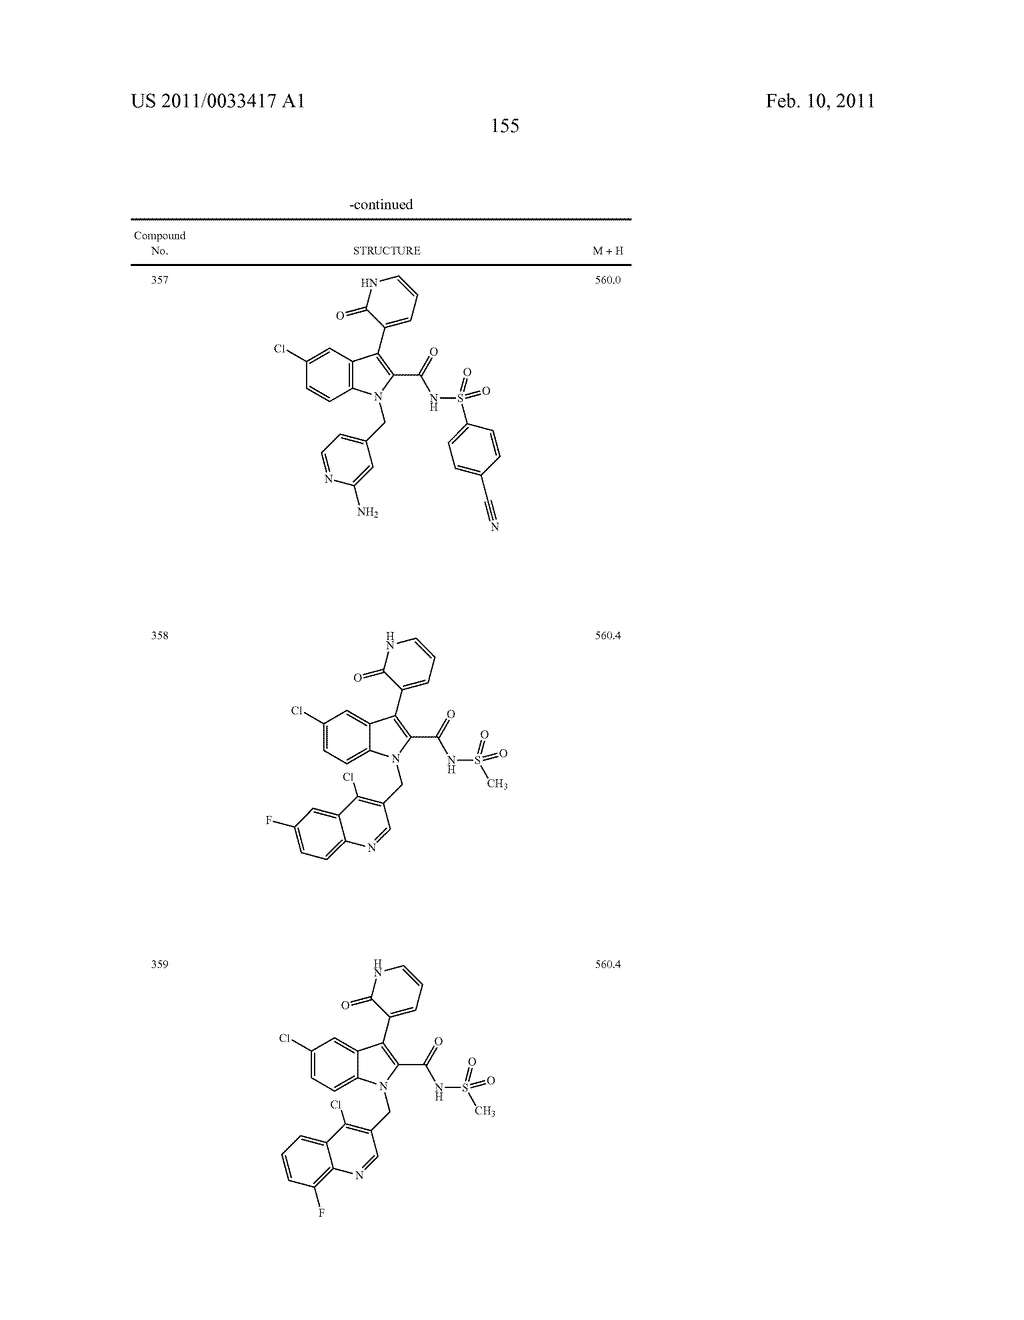 2,3-SUBSTITUTED INDOLE DERIVATIVES FOR TREATING VIRAL INFECTIONS - diagram, schematic, and image 156